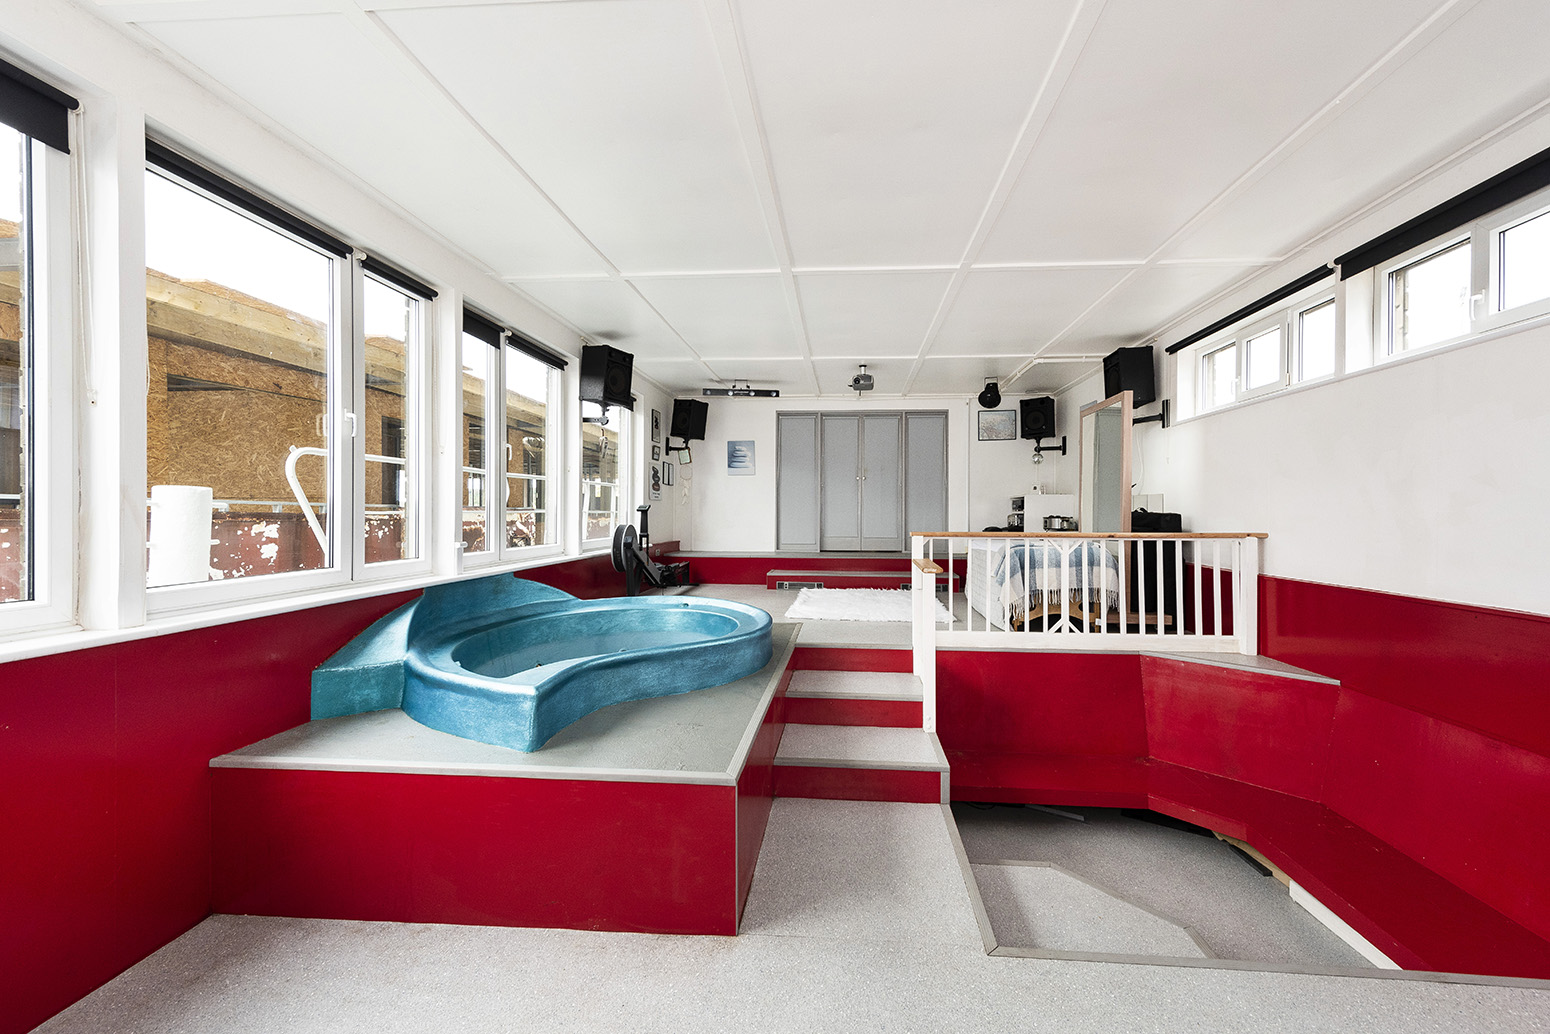 8 bed house boat for sale in Vicarage Lane, Rochester 6